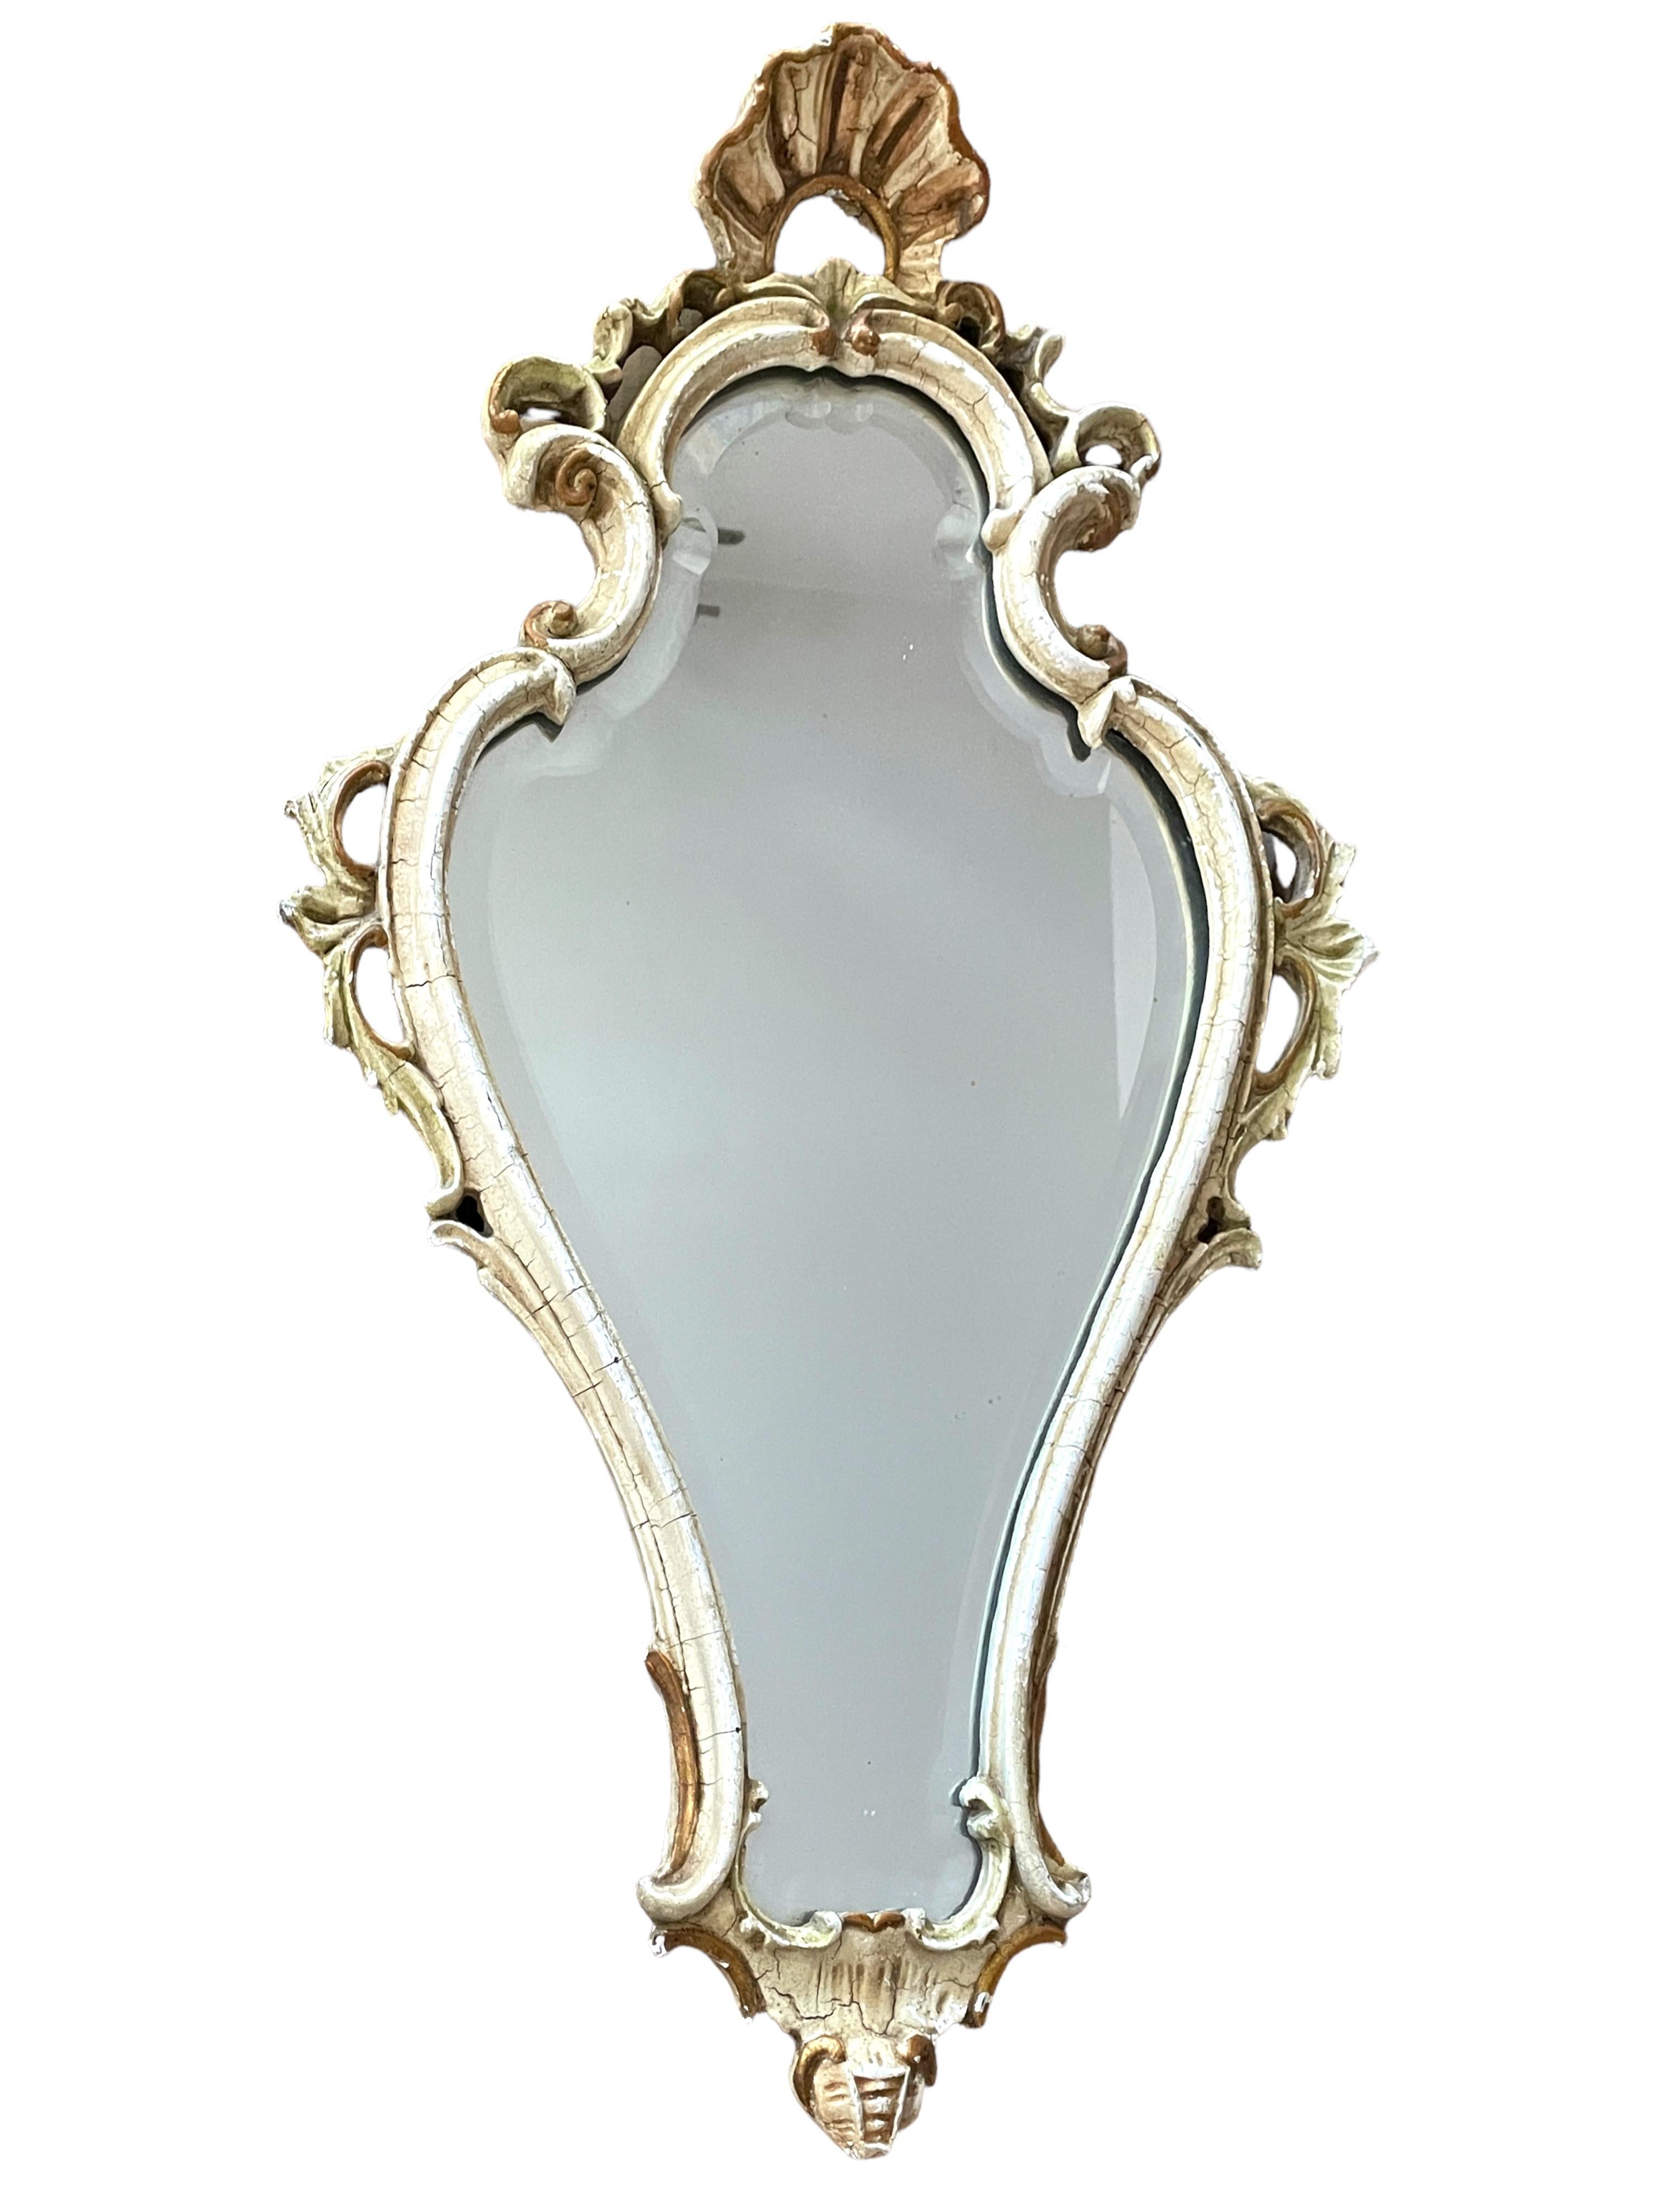 Beautiful Stunning Rococo Tole Toleware Mirror Vintage, Germany, 19th Century For Sale 2